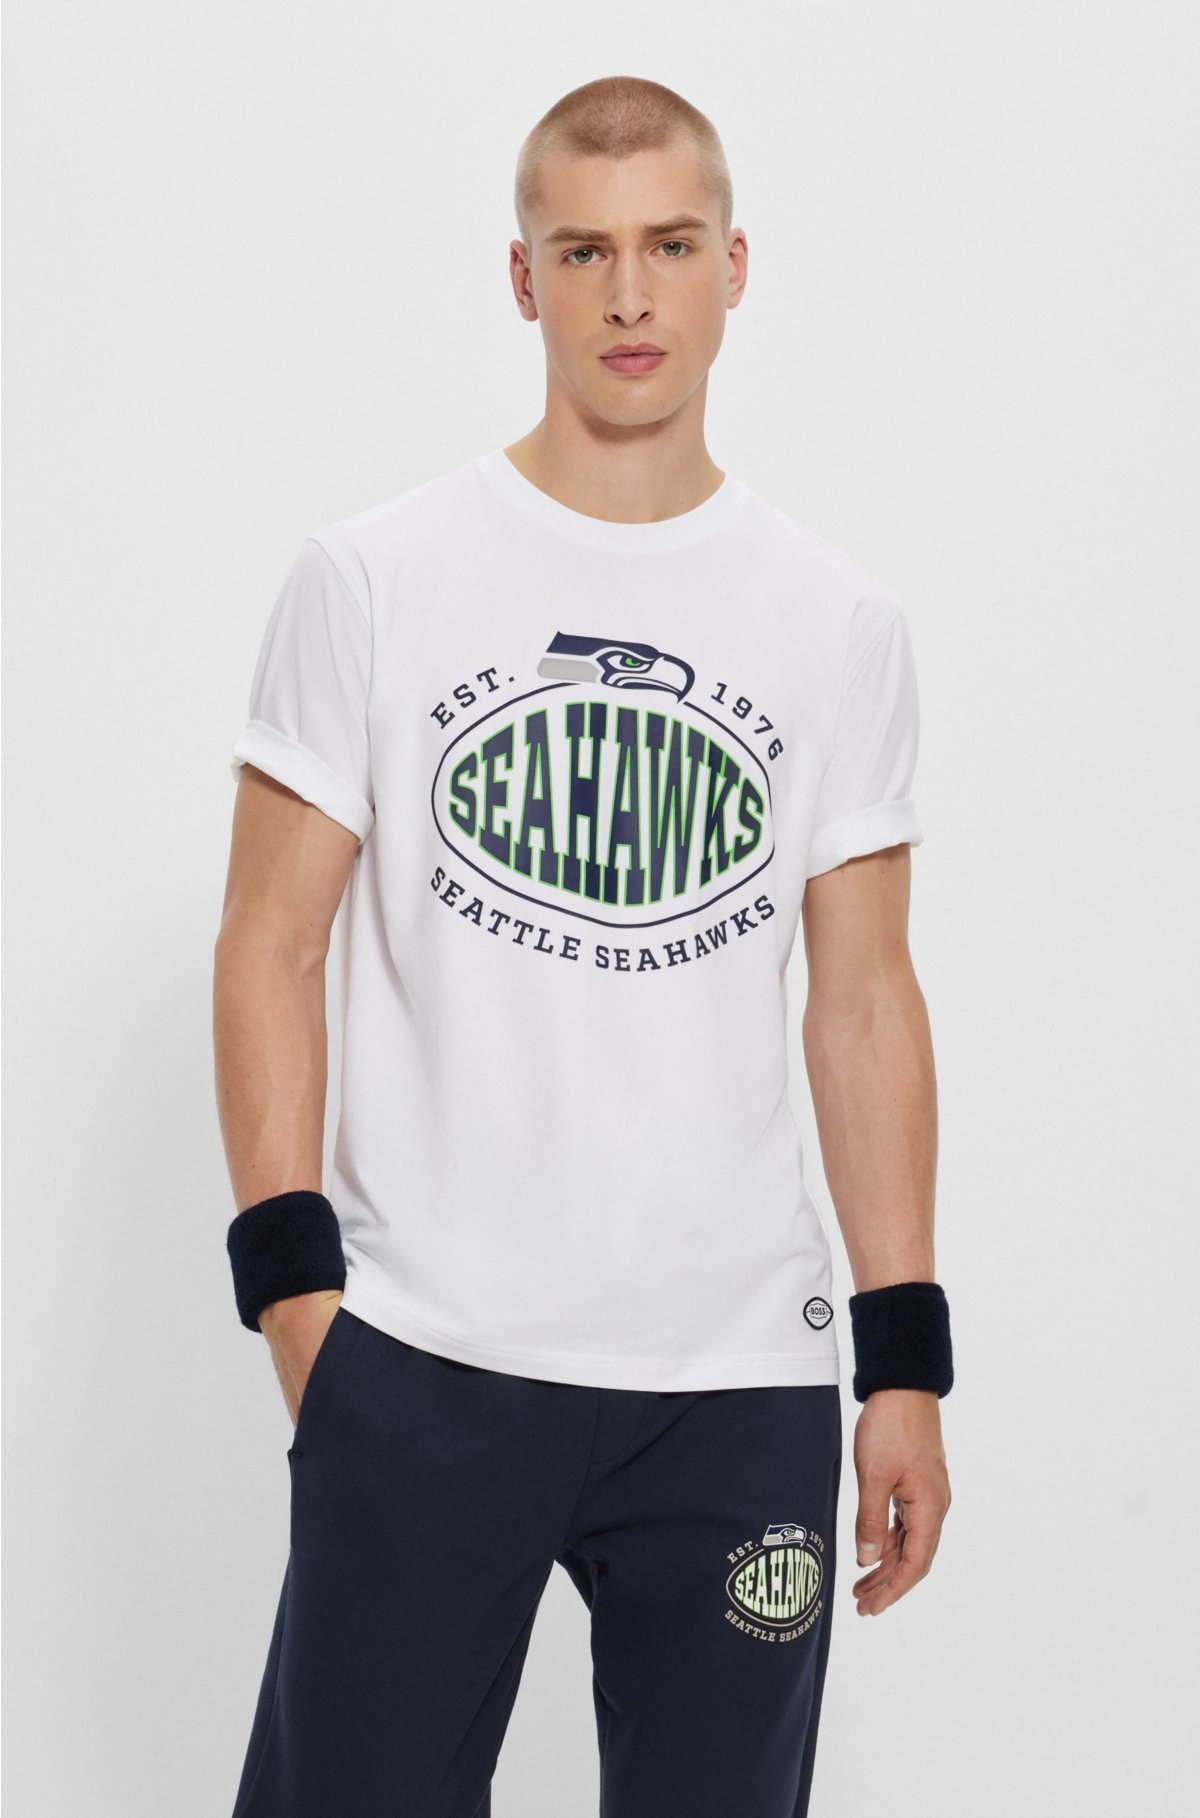  BOSS x NFL stretch-cotton T-shirt with collaborative branding, Seahawks